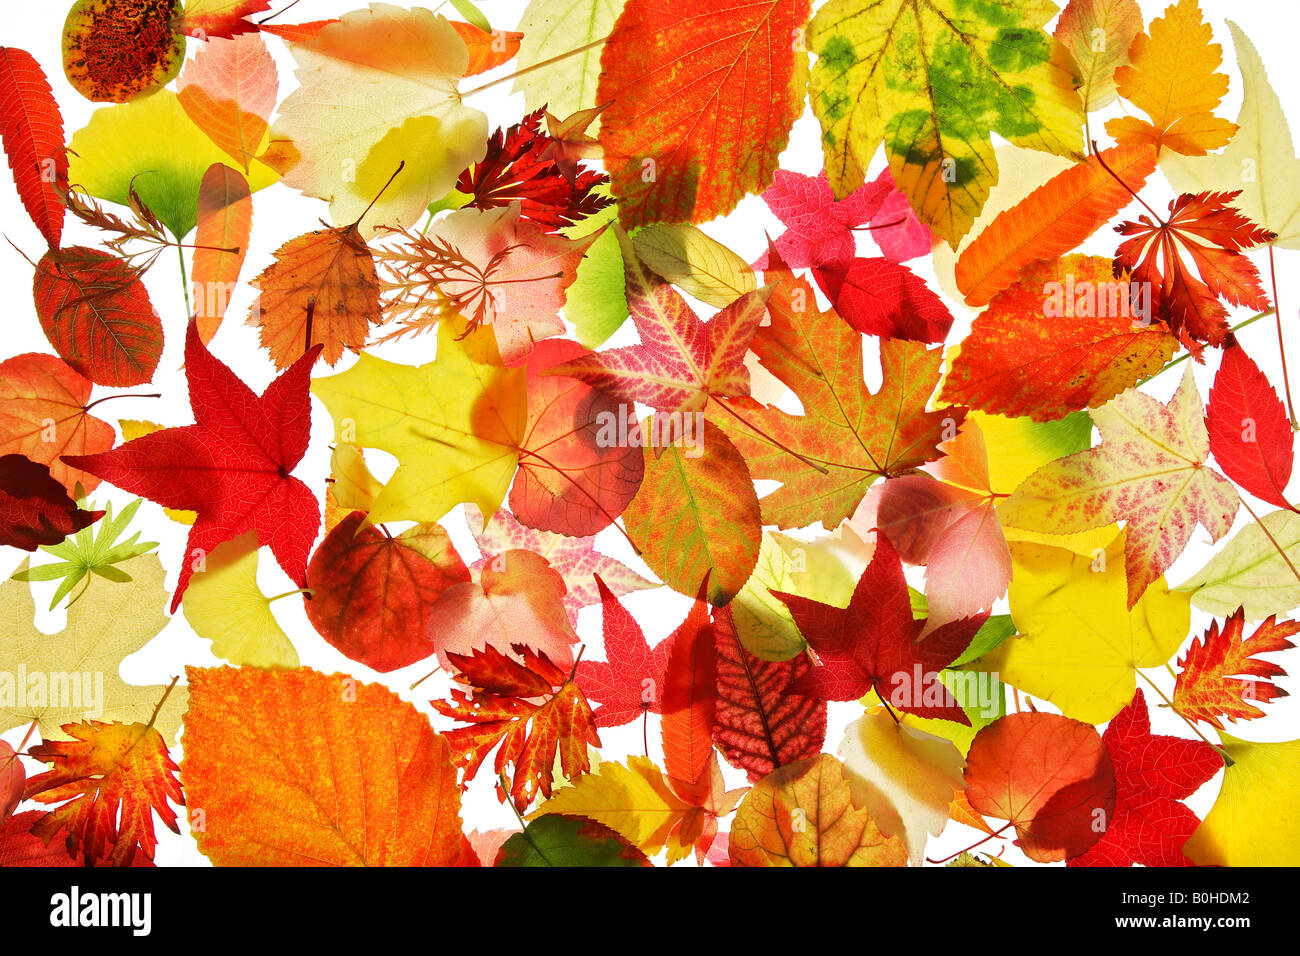 Collection of various autumn coloured leaves Stock Photo